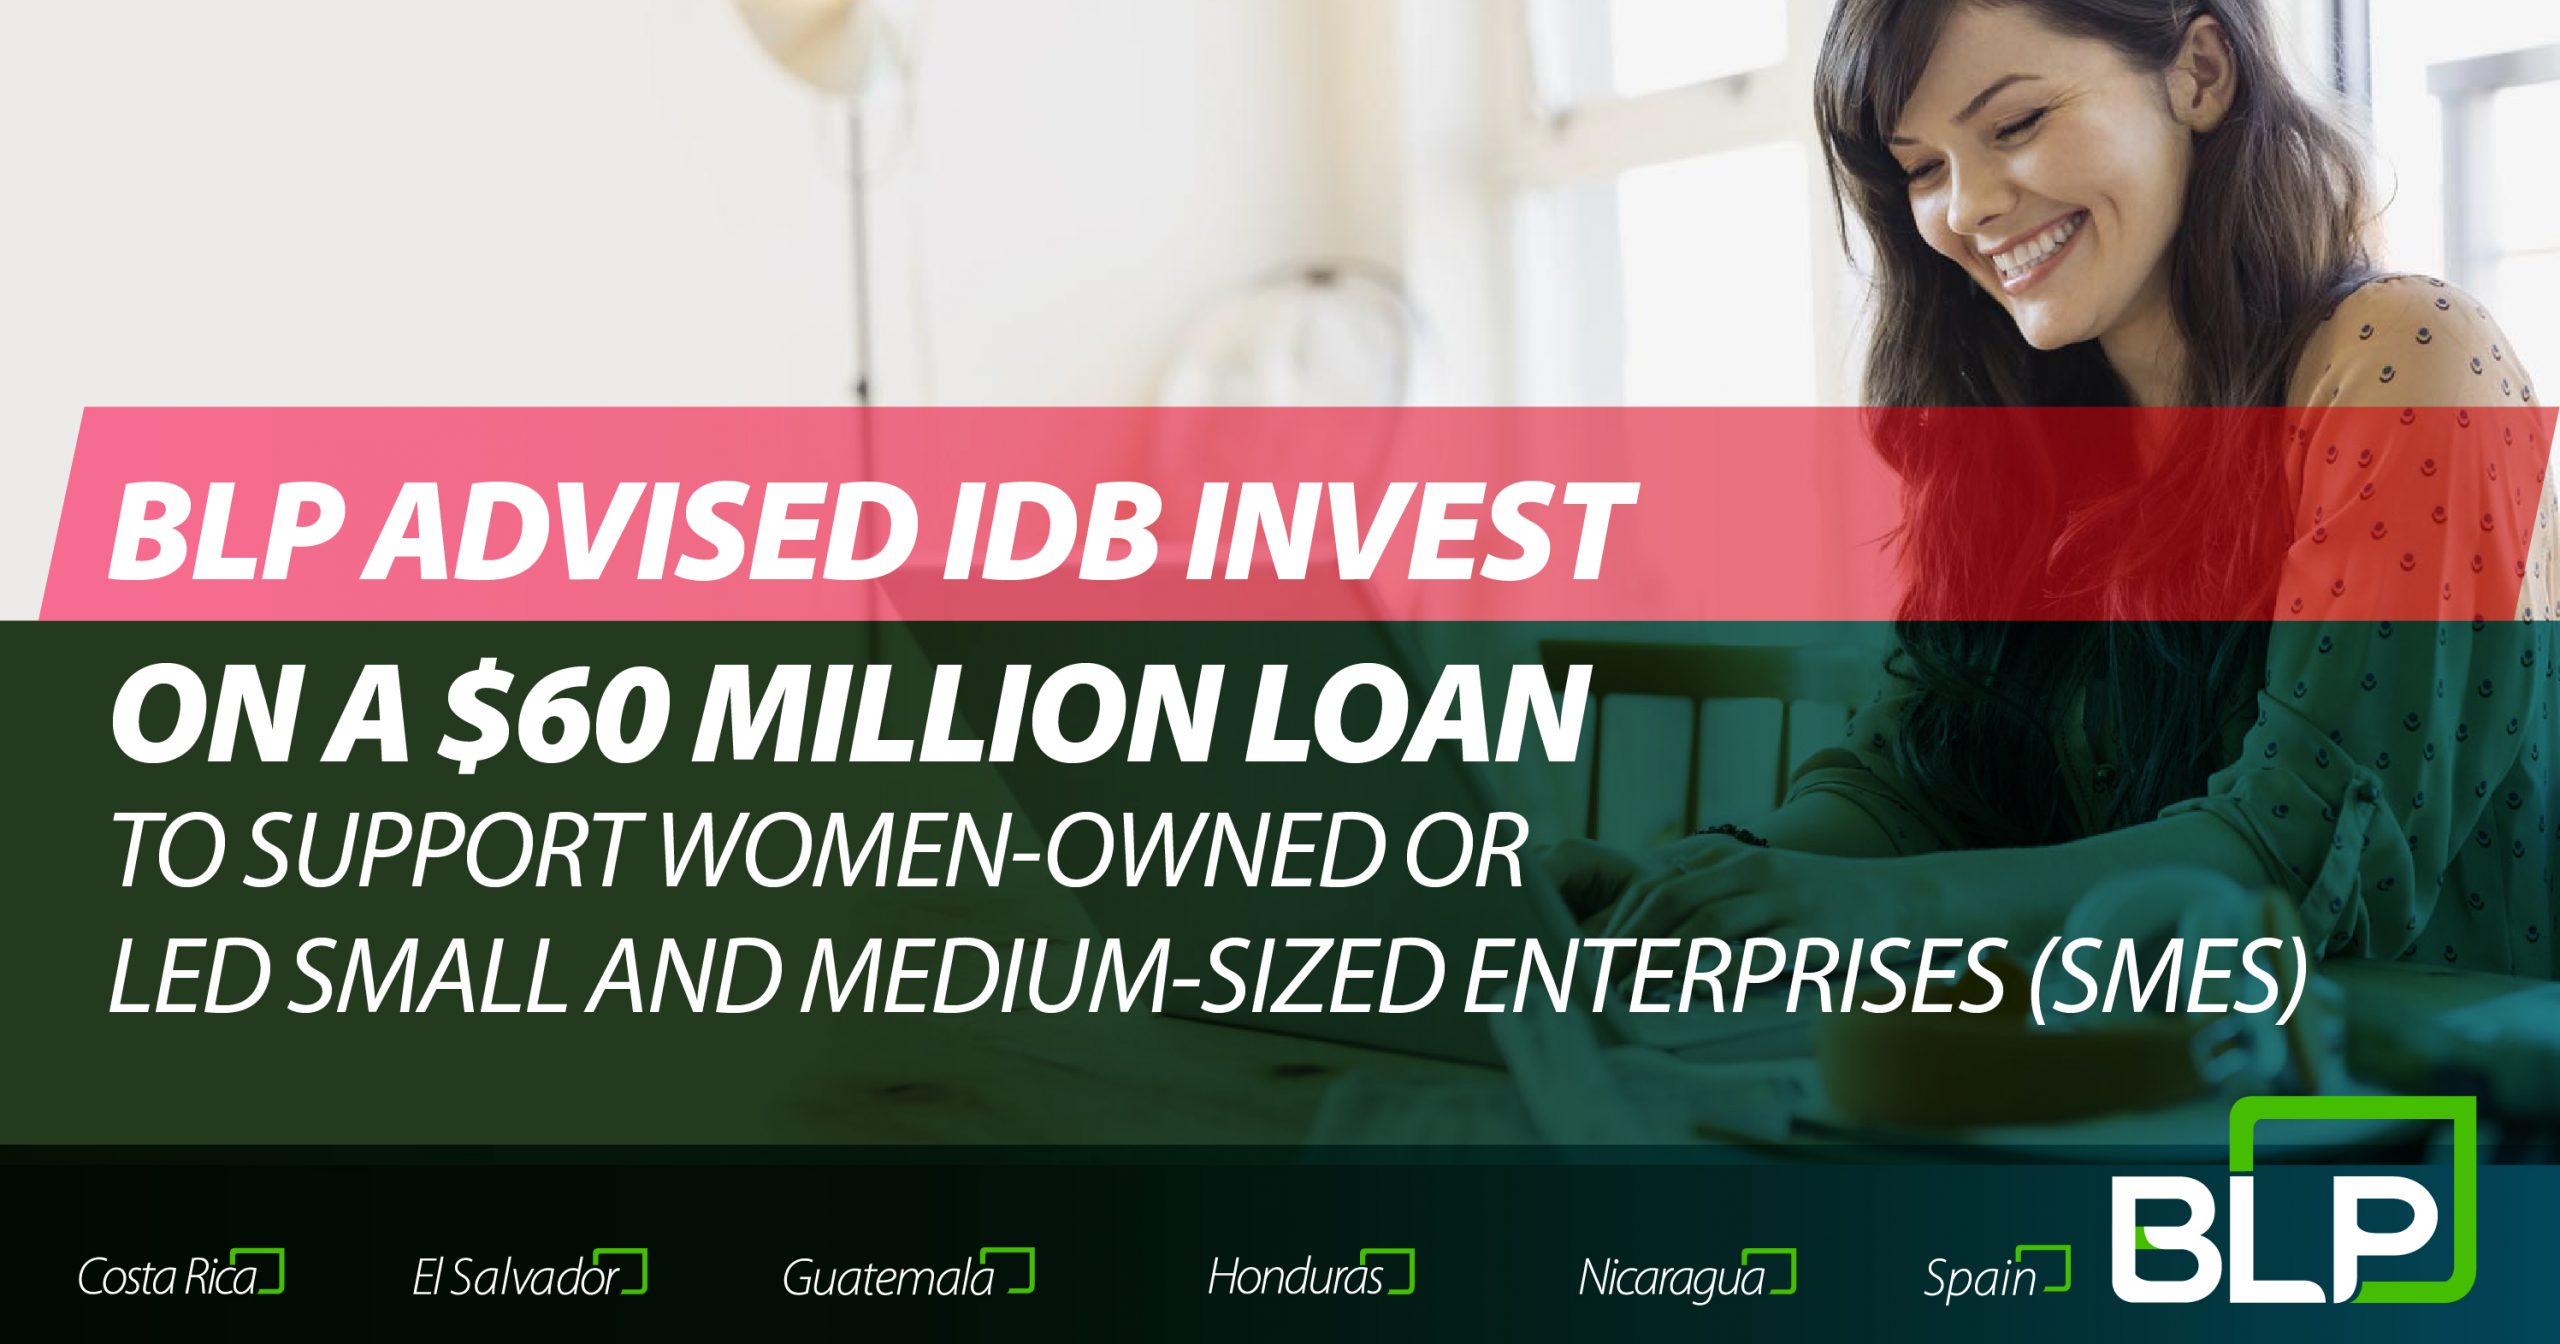 BLP advised IDB Invest on a $60 million loan to support women-owned or led small and medium-sized enterprises (SMEs).